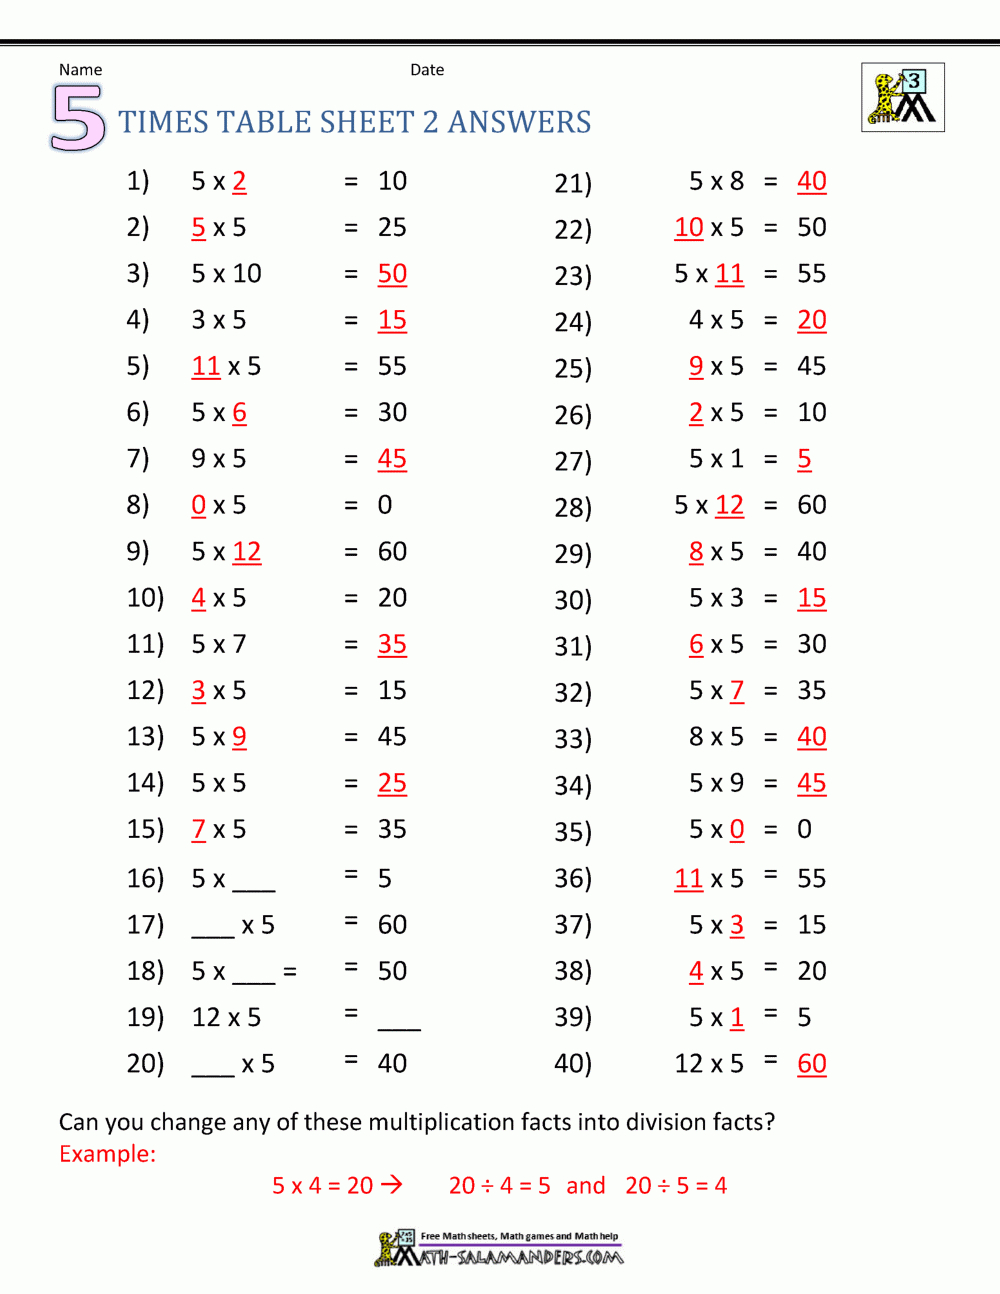 Multiplication Table Worksheets Grade 3 within Printable 50 Multiplication Facts Test